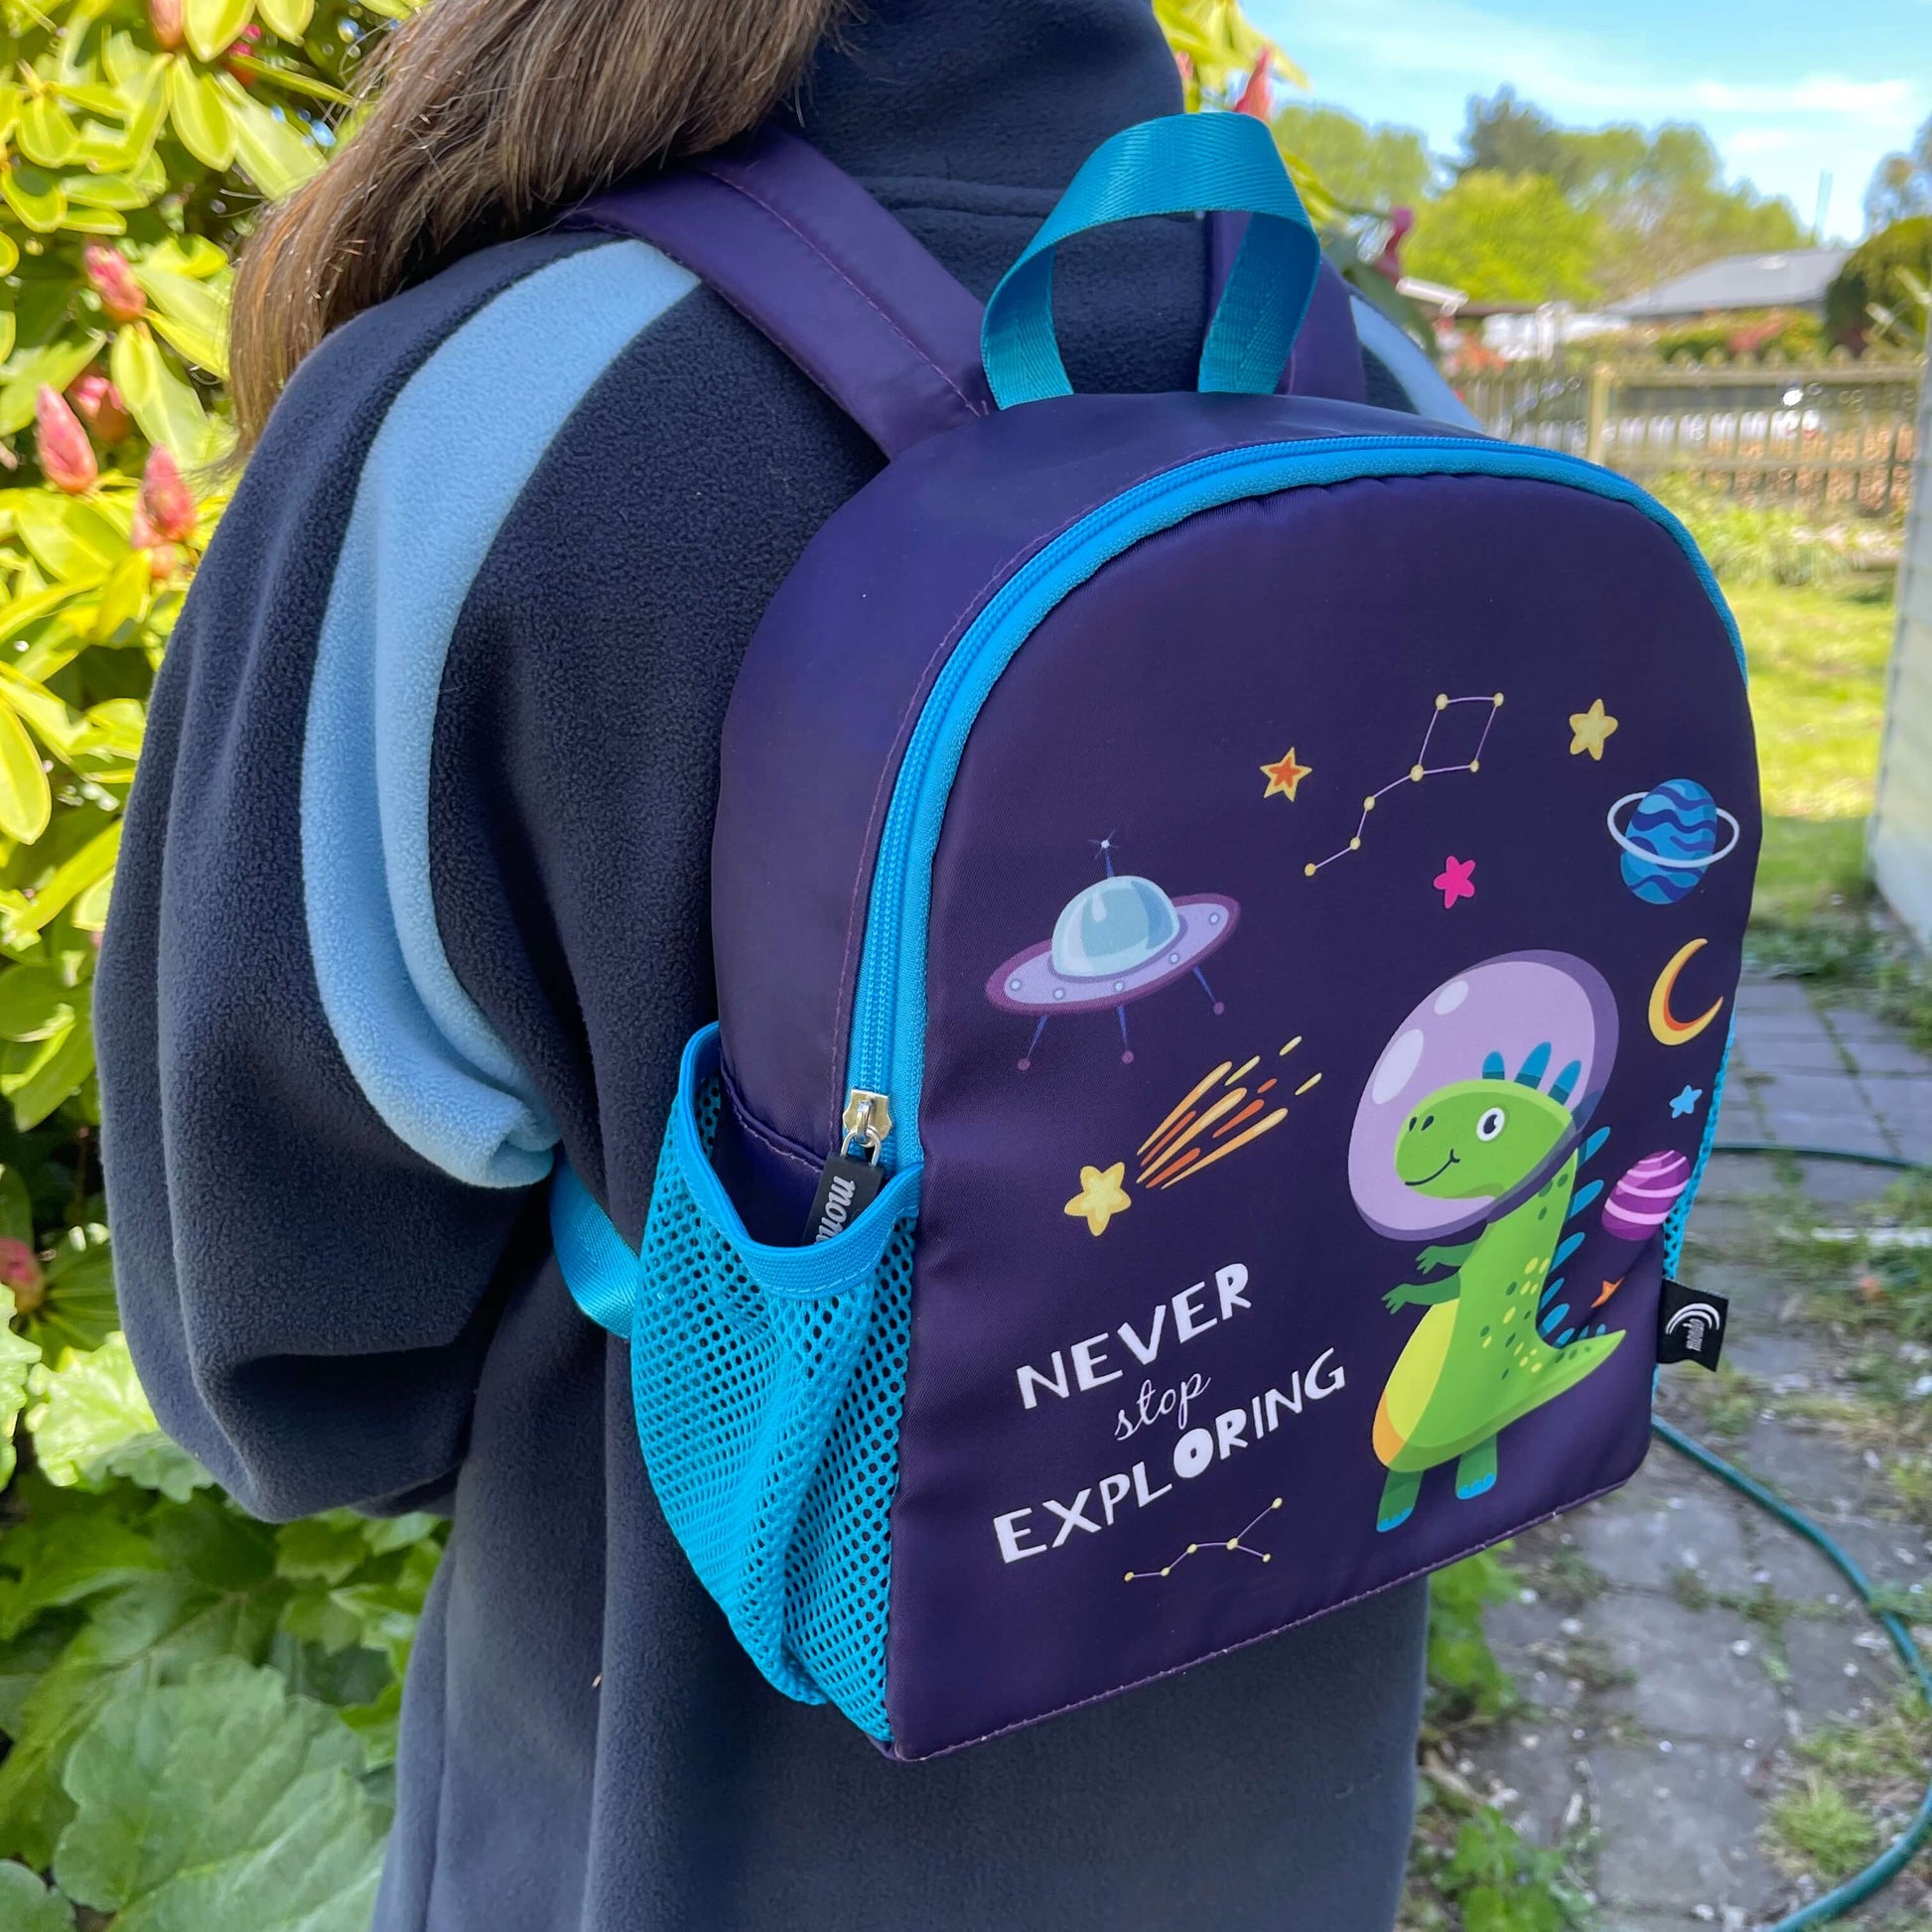 Blue kids backpack with an astronaut dinosaur print and the words "never stop exploring" on it.